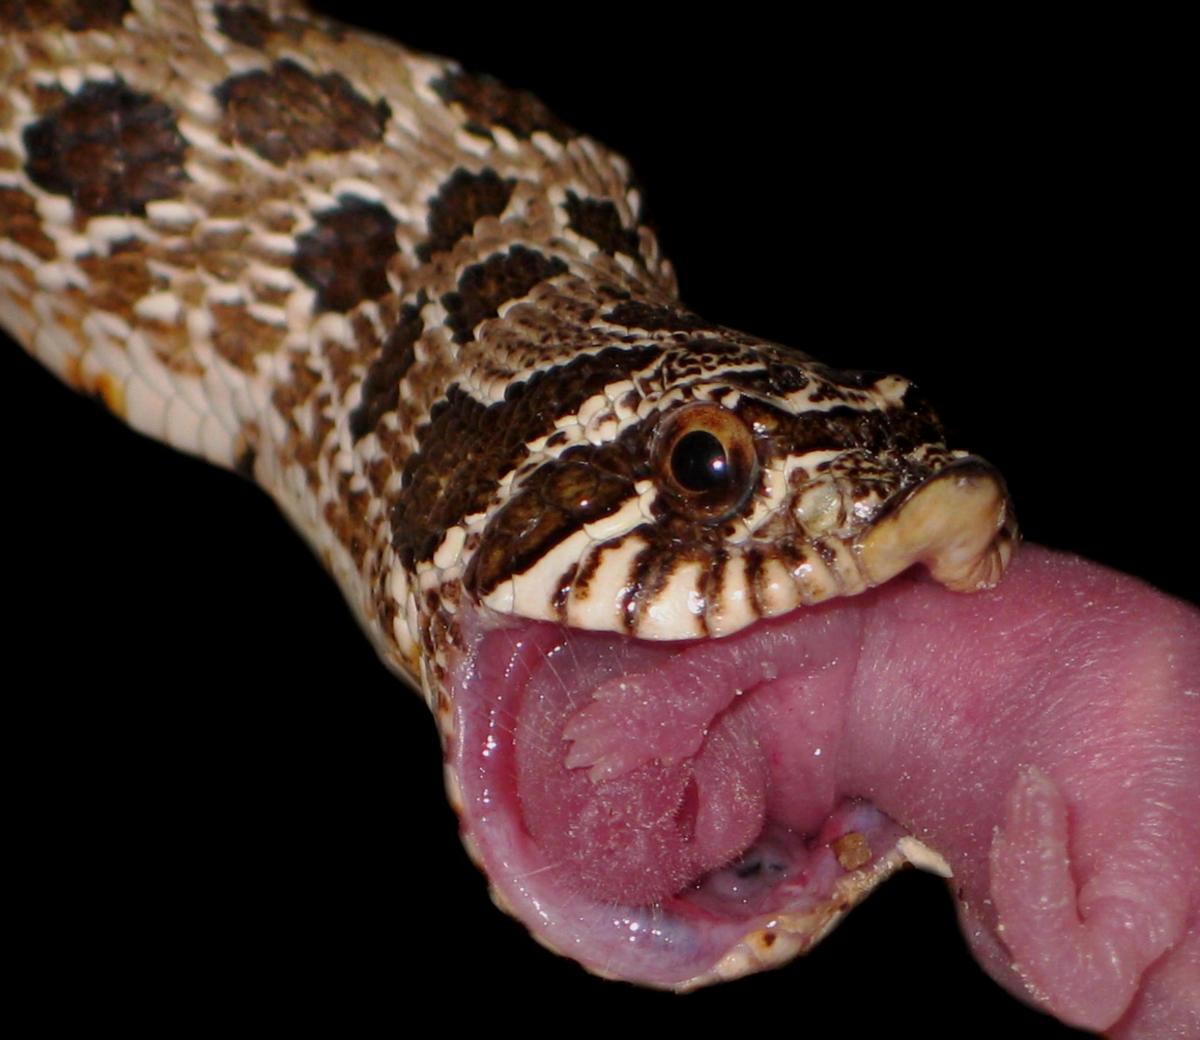 A Western Hognose Snake (Heterodon nasicus) swallowing a live pinkie House Mouse (Mus musculus).  Pinkie mice are often recognized by snakes to be harmless prey that can be safely procured in its native state.